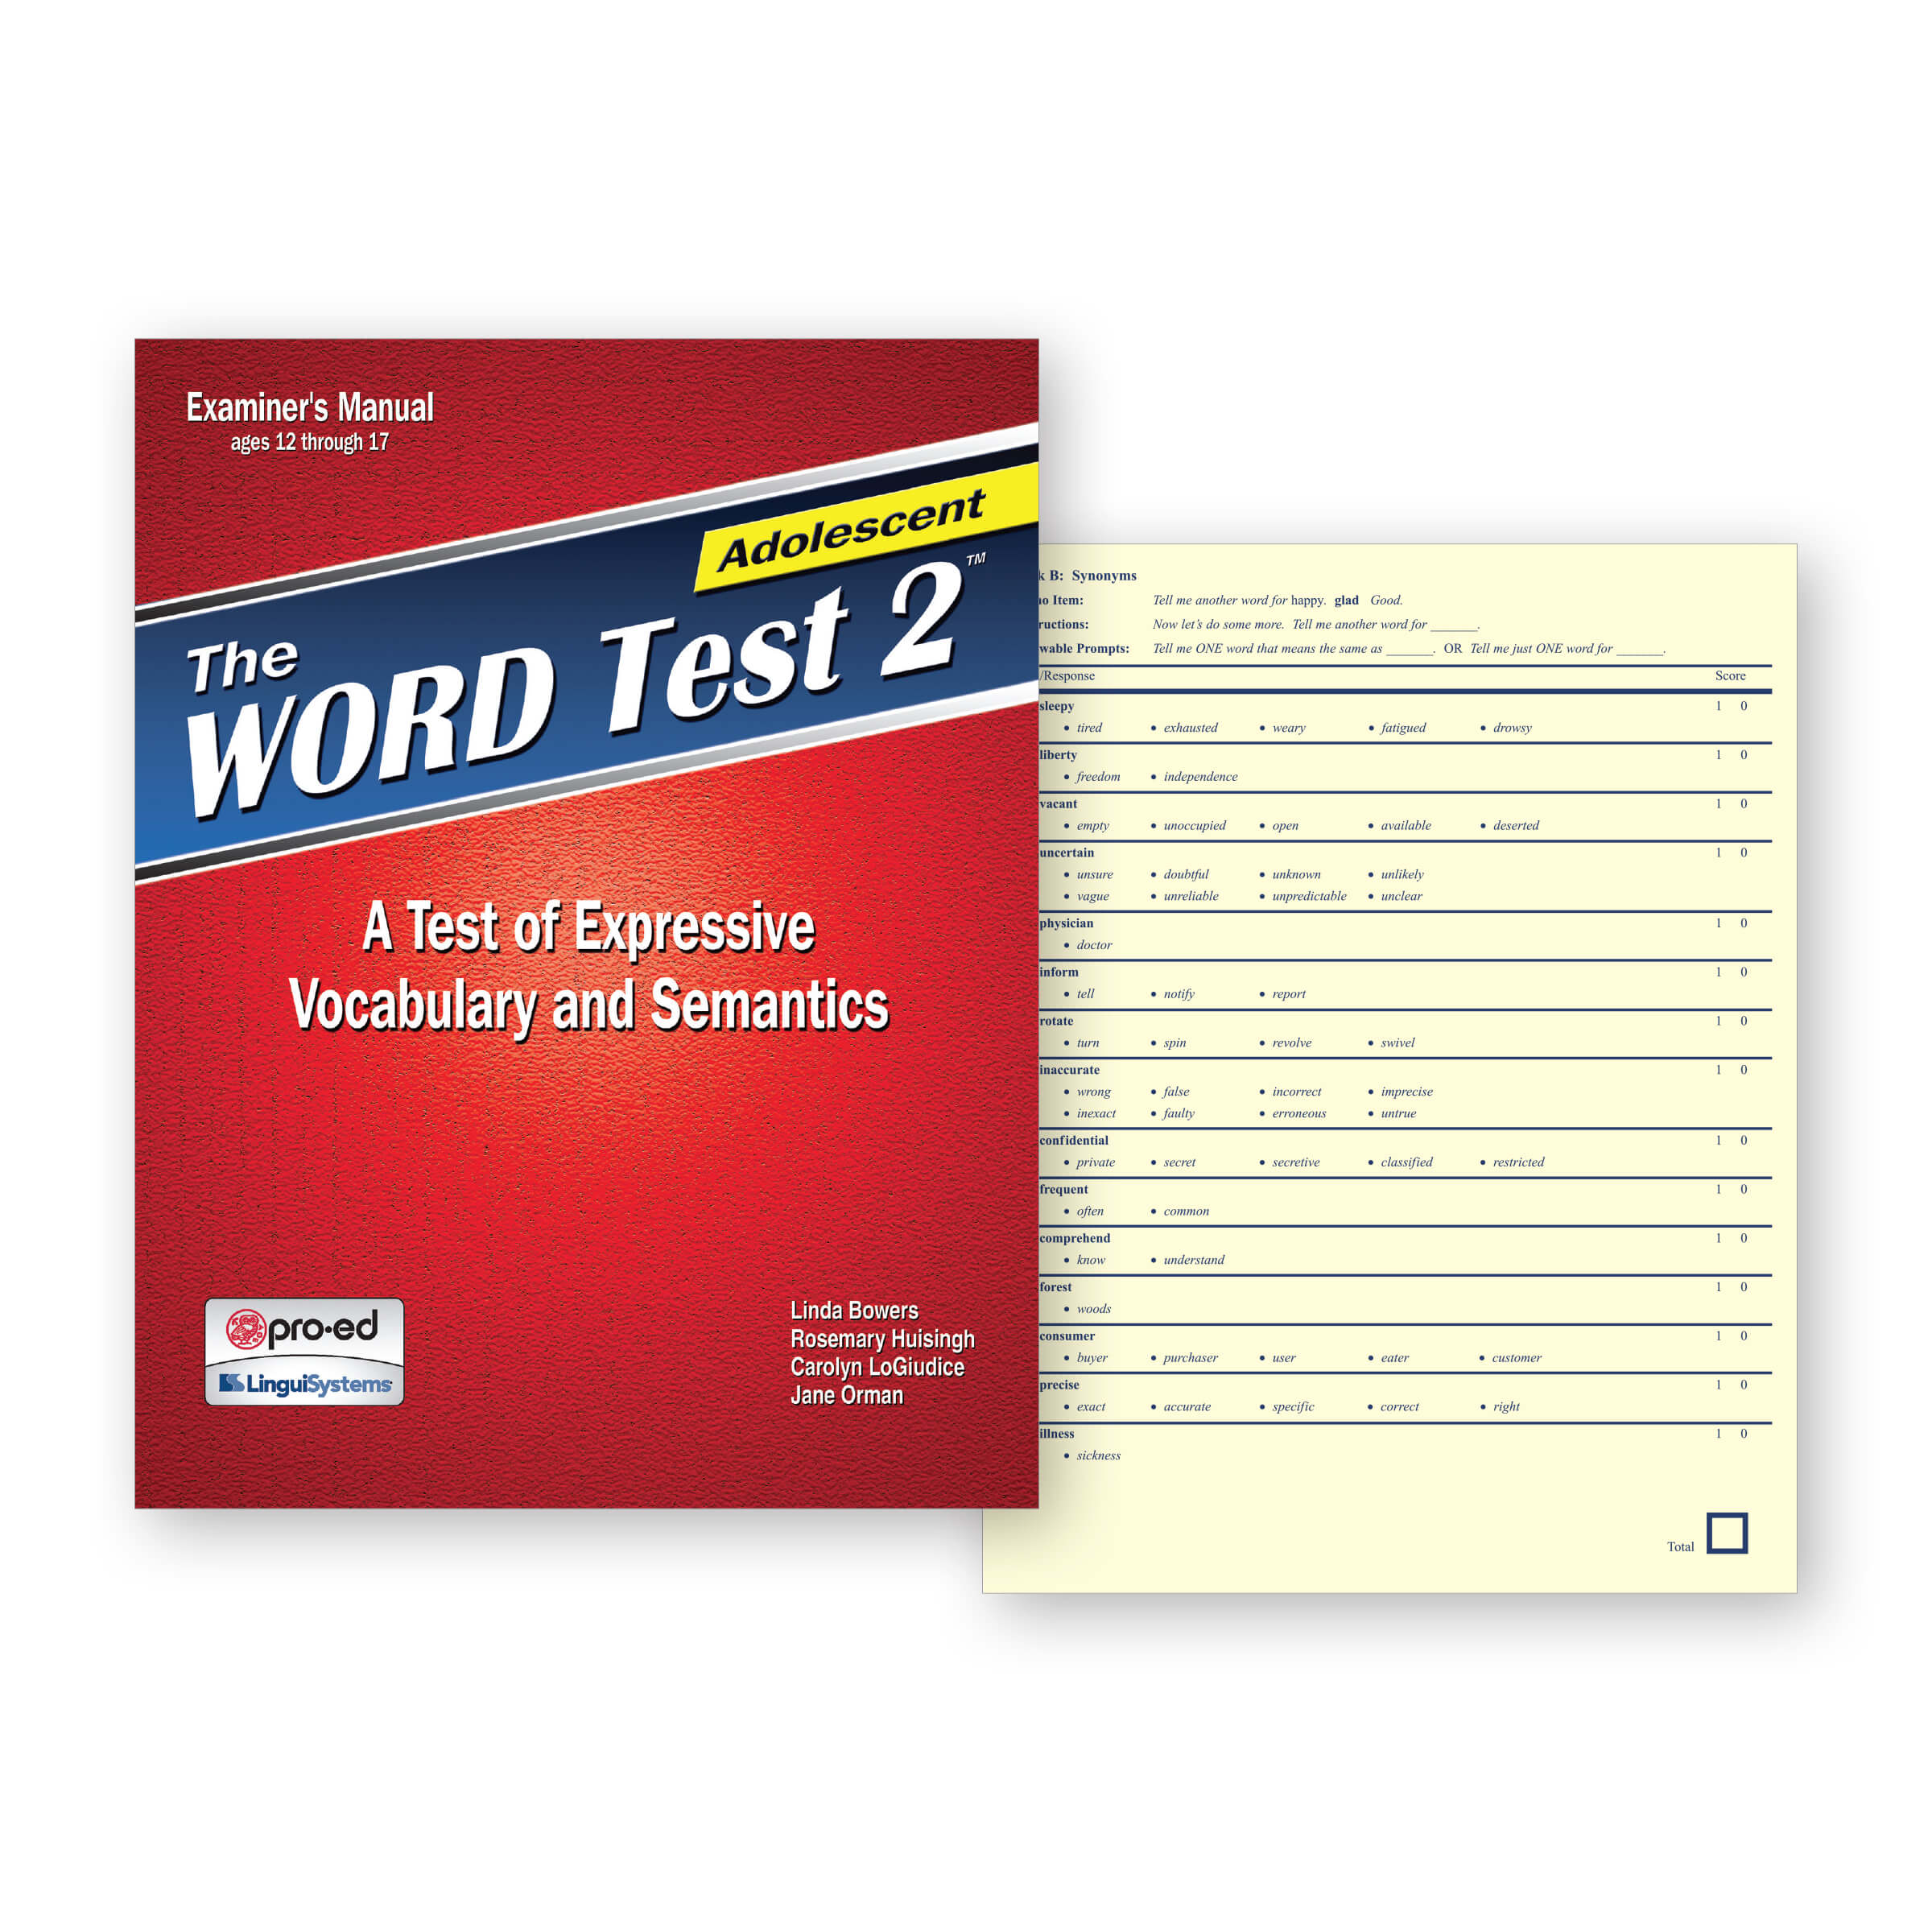 The WORD Test 2–Adolescent - 